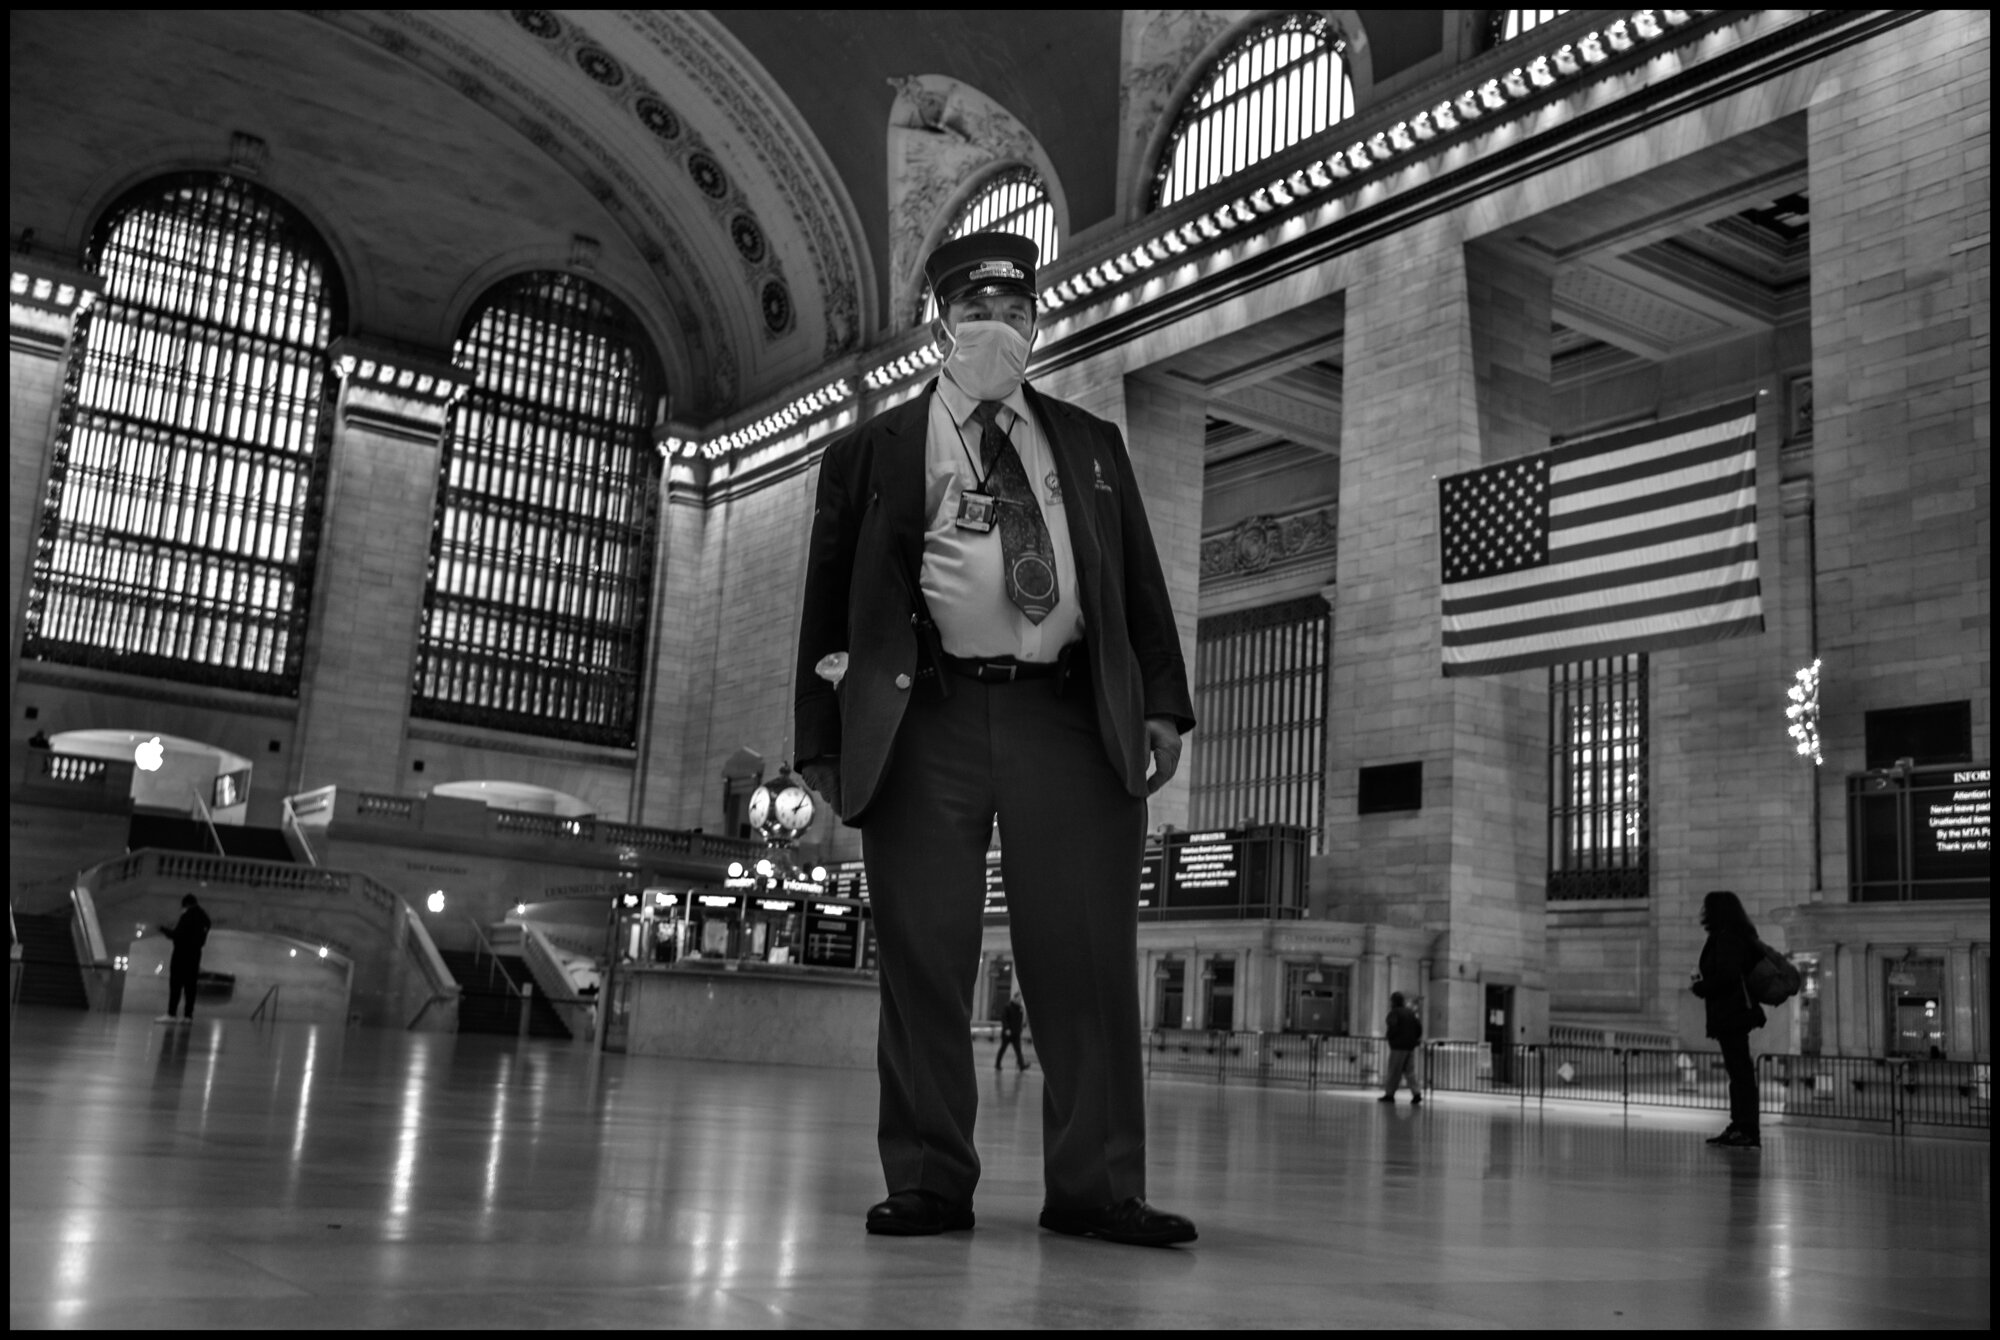  Larry, 57, a customer service worker for Metro North.  April 18, 2020. © Peter Turnley  ID# 25-009 